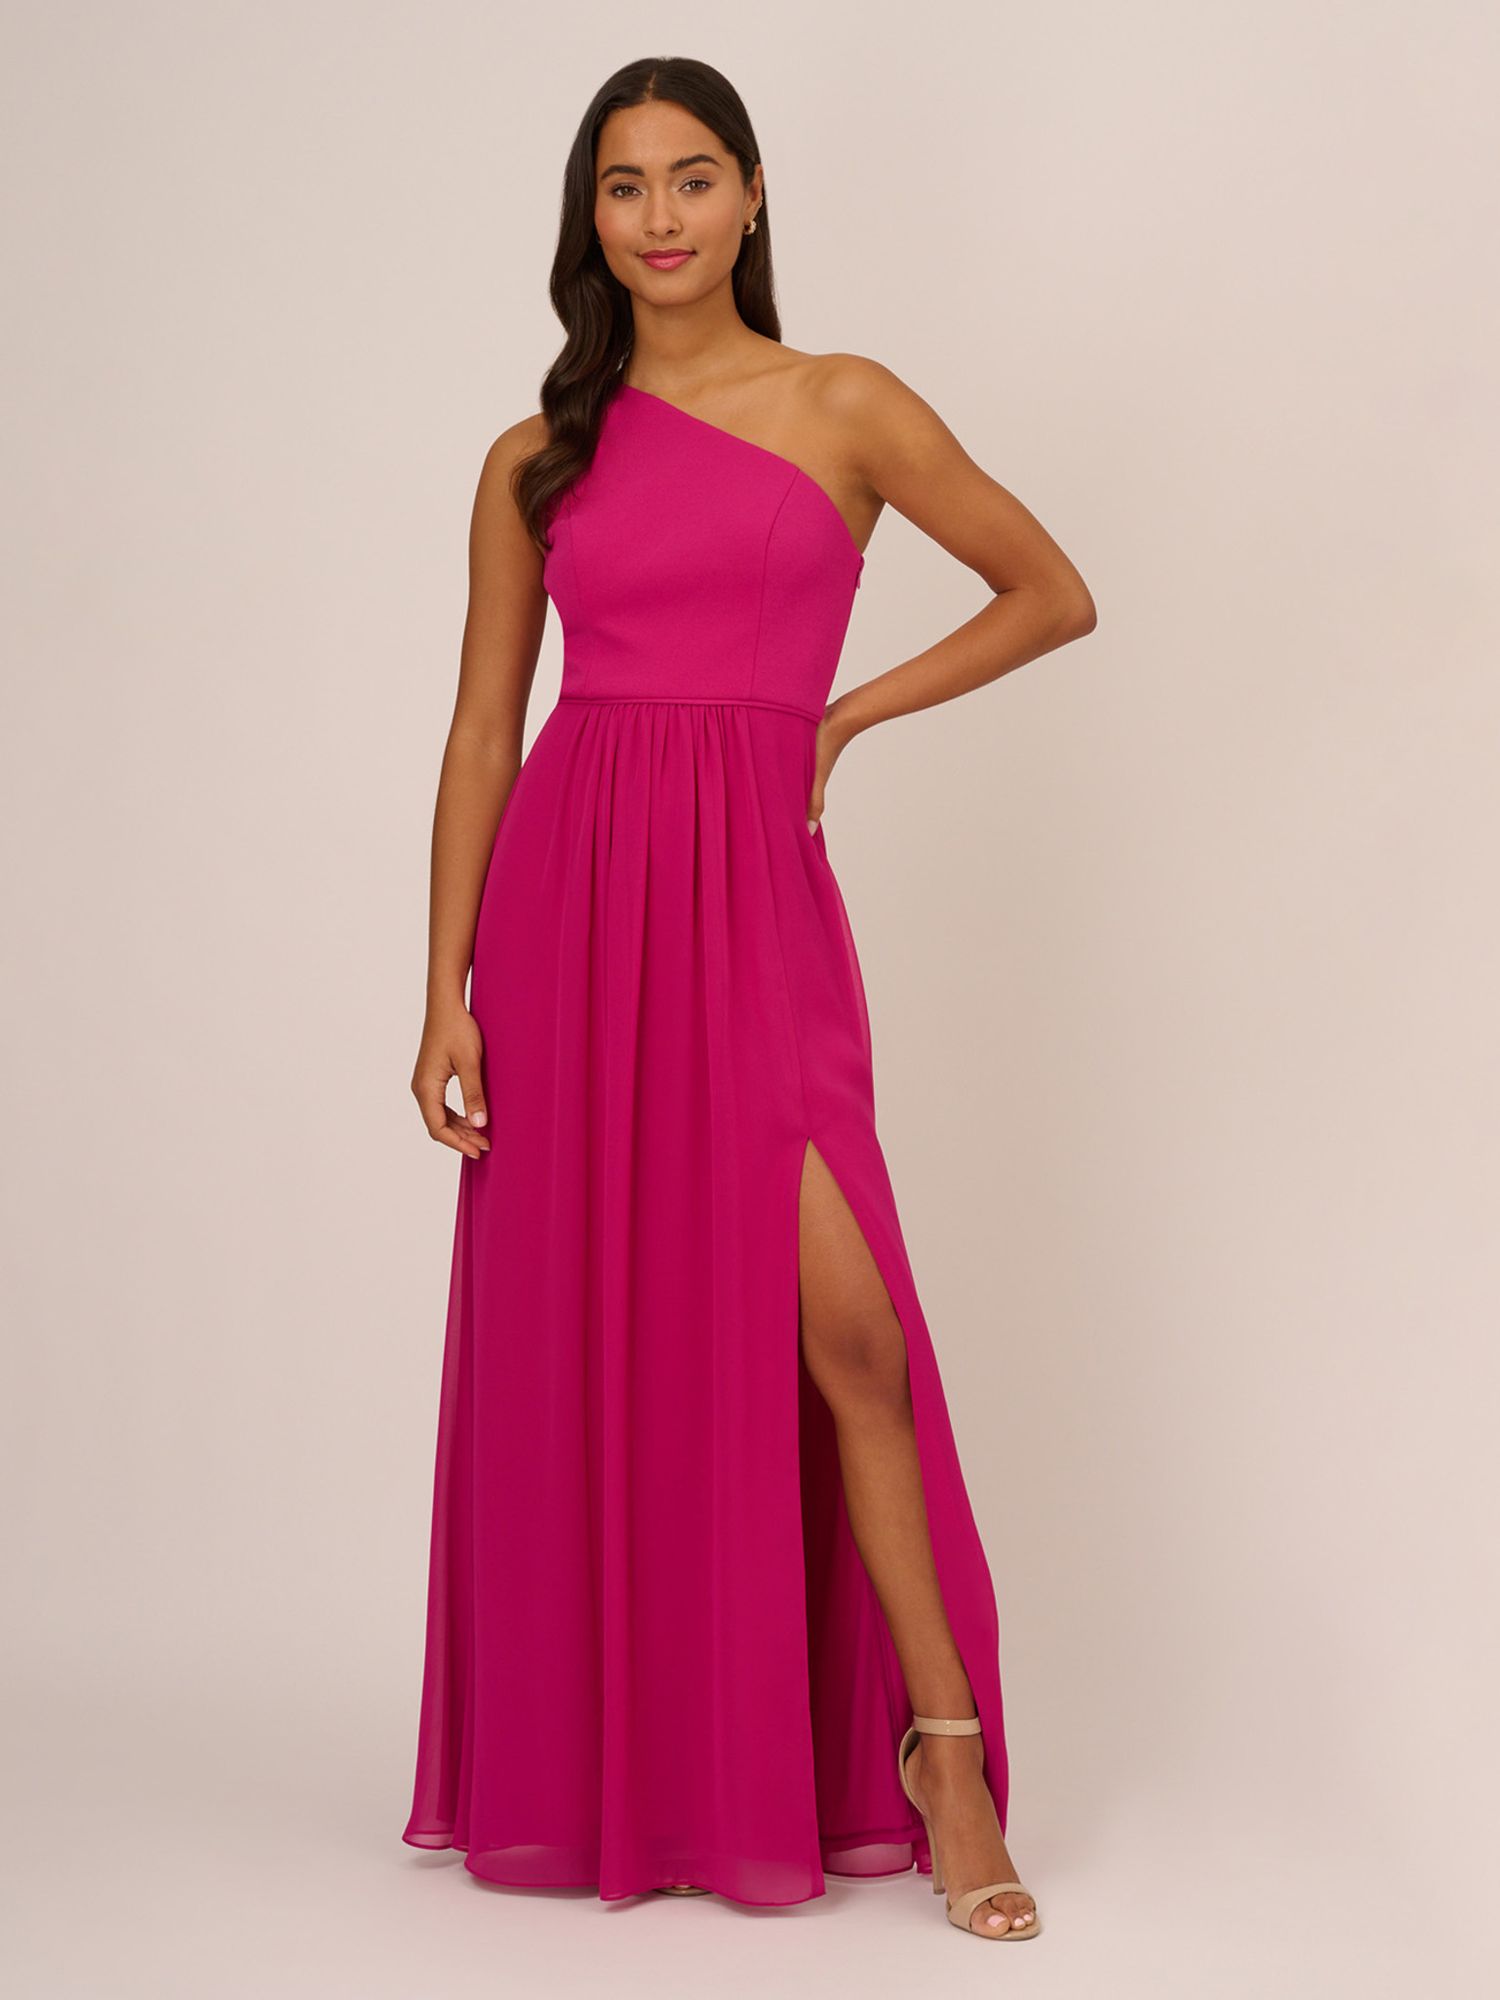 Buy Adrianna Papell One Shoulder Chiffon Gown Online at johnlewis.com